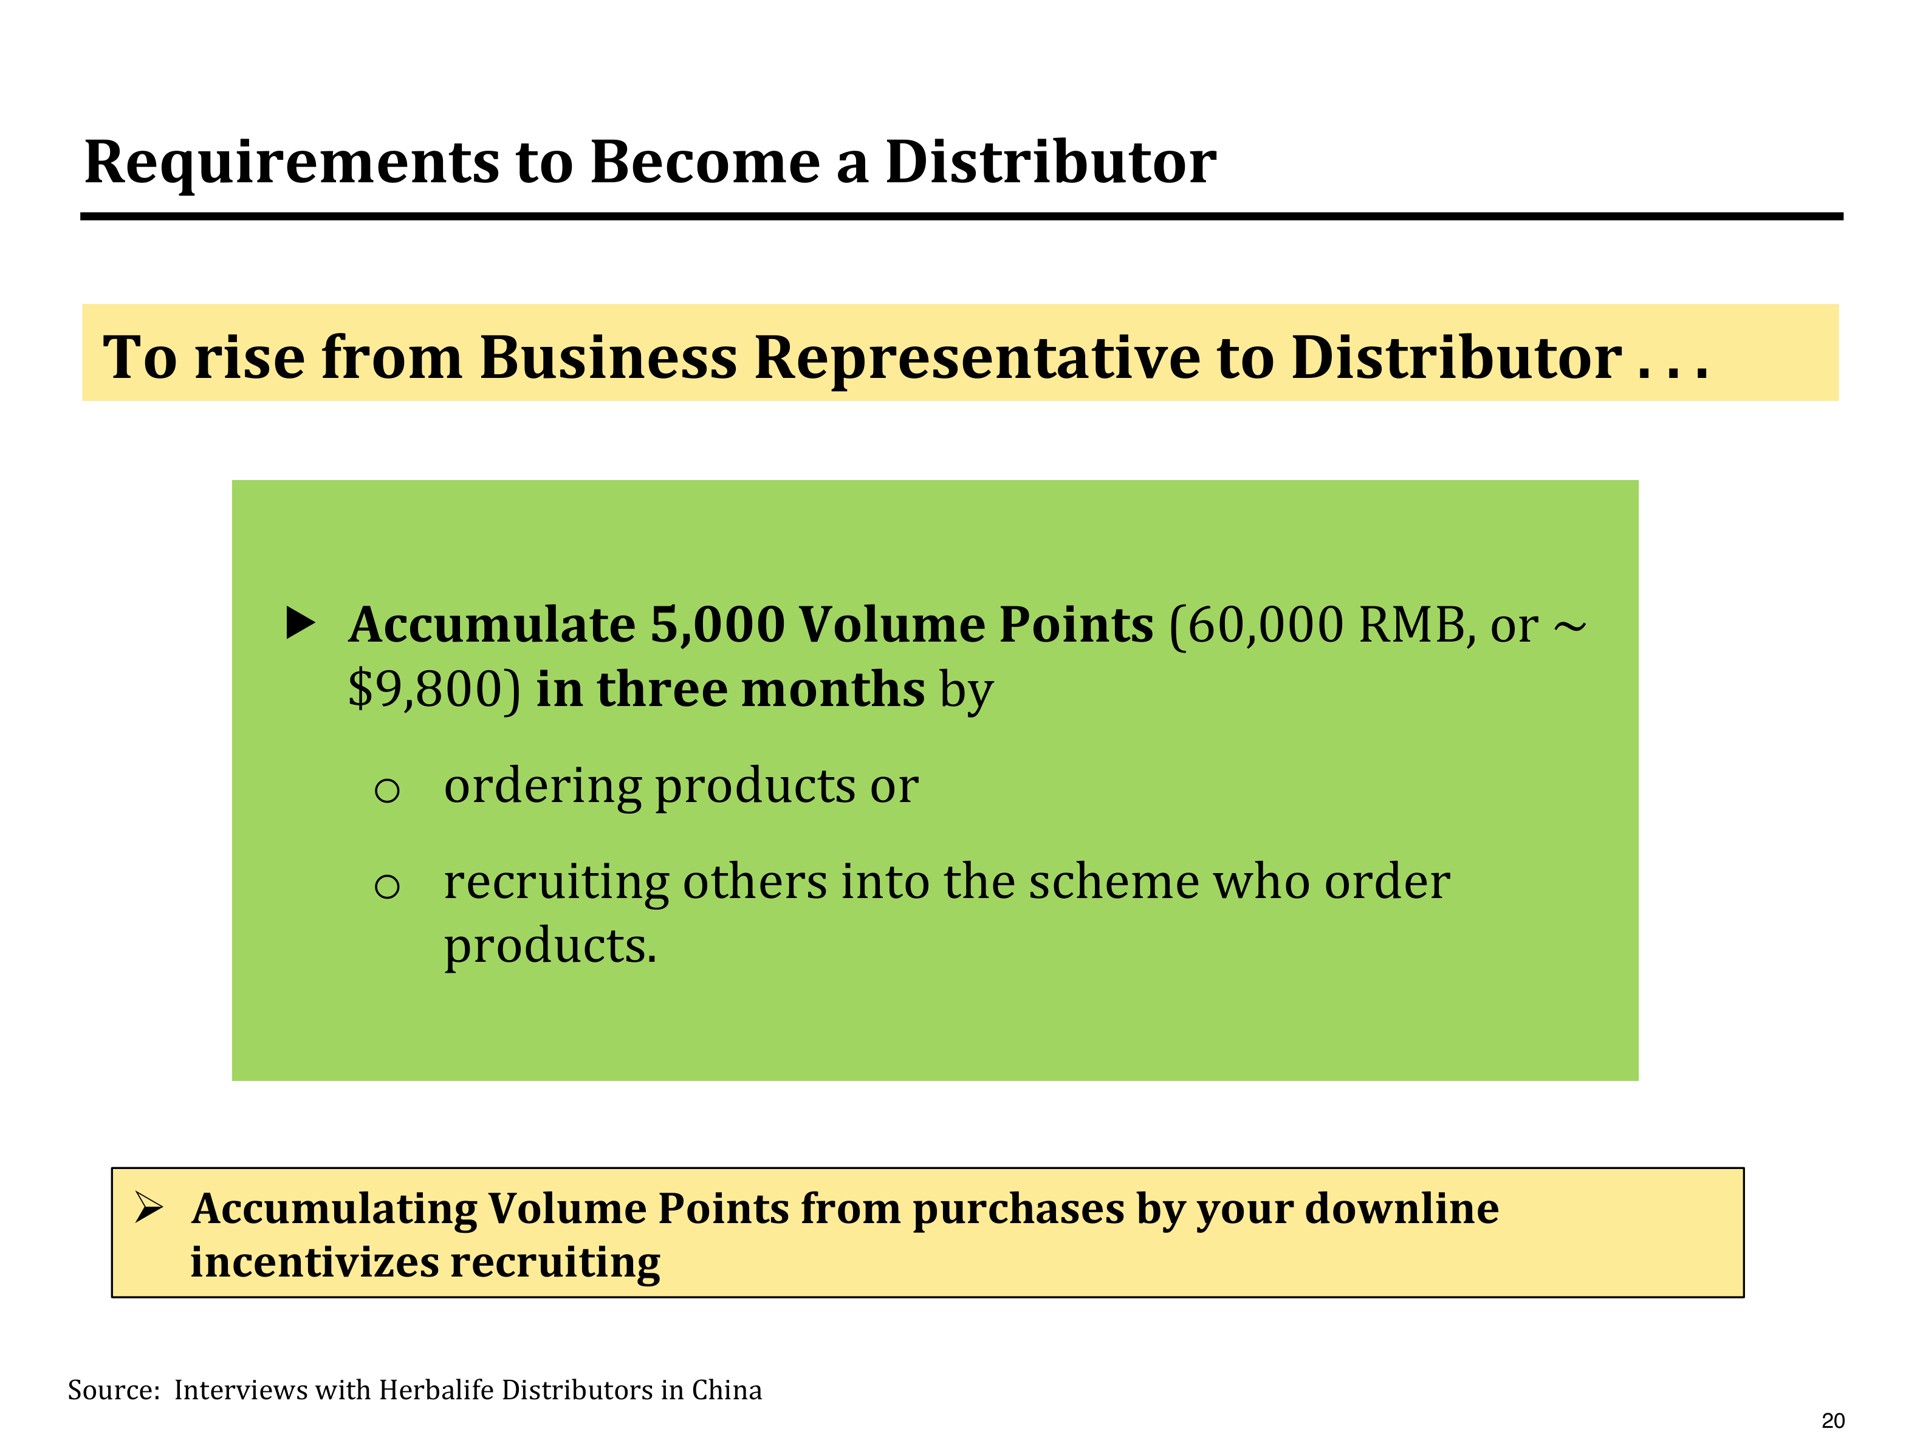 requirements to become a distributor to rise from business representative to distributor in three months by | Pershing Square